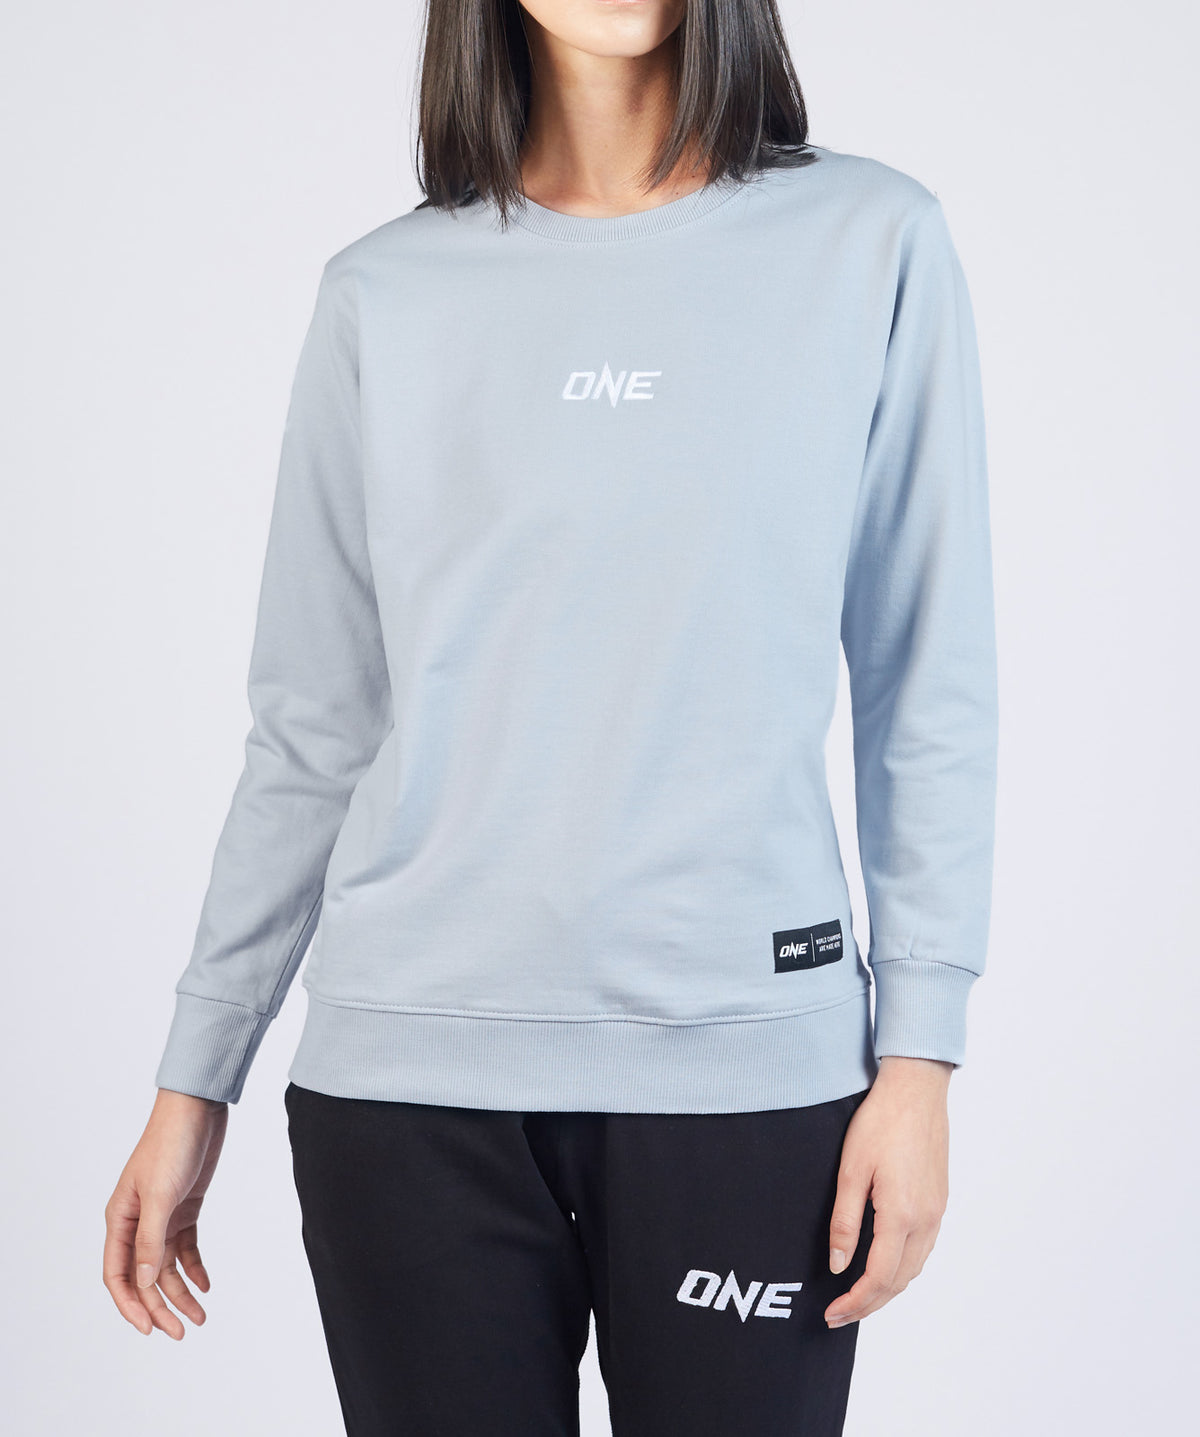 ONE Signature Logo Sweatshirt (Steel Blue) - ONE.SHOP | The Official Online Shop of ONE Championship